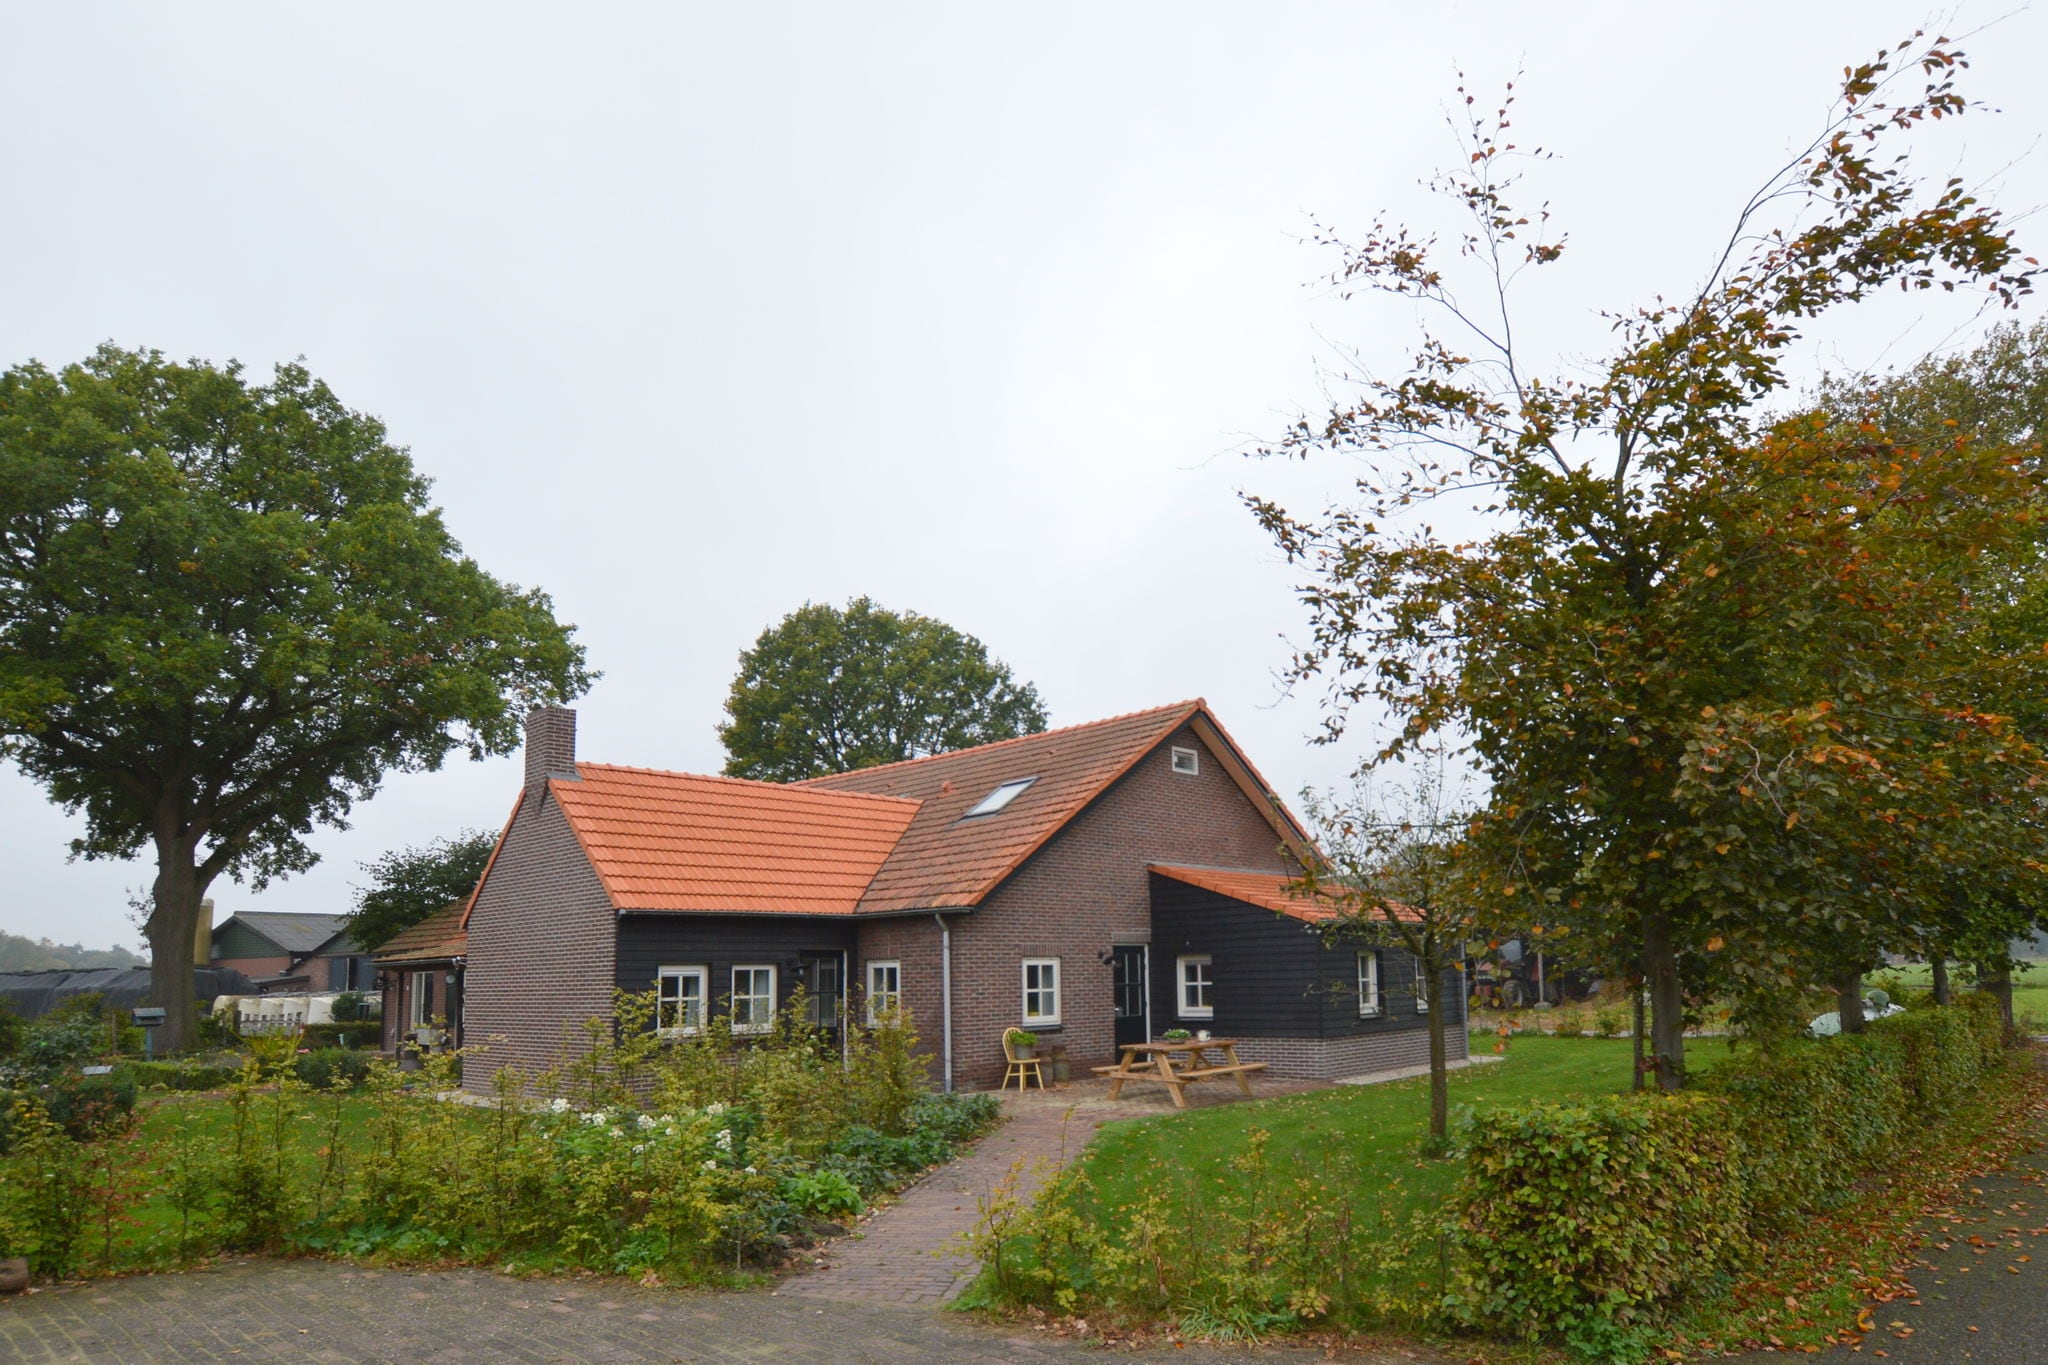 Cosy holiday home on a farm in Zeeland